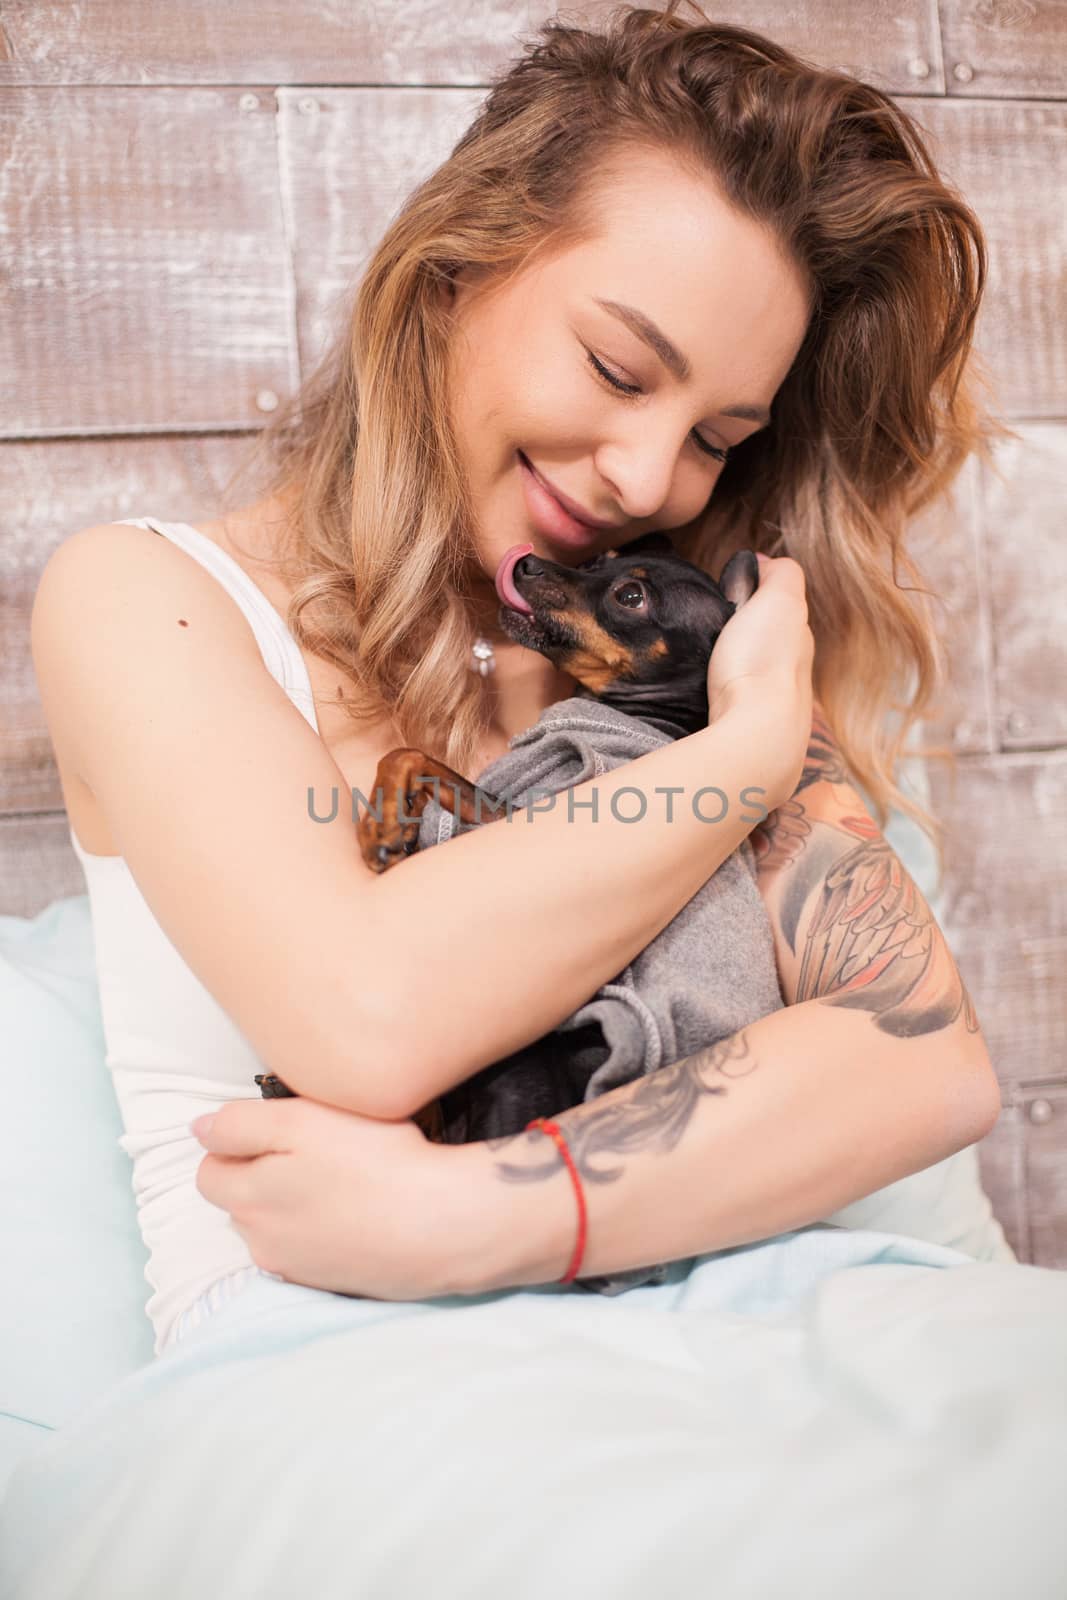 Pretty young woman in pajamas giving affection to her little dog by DCStudio